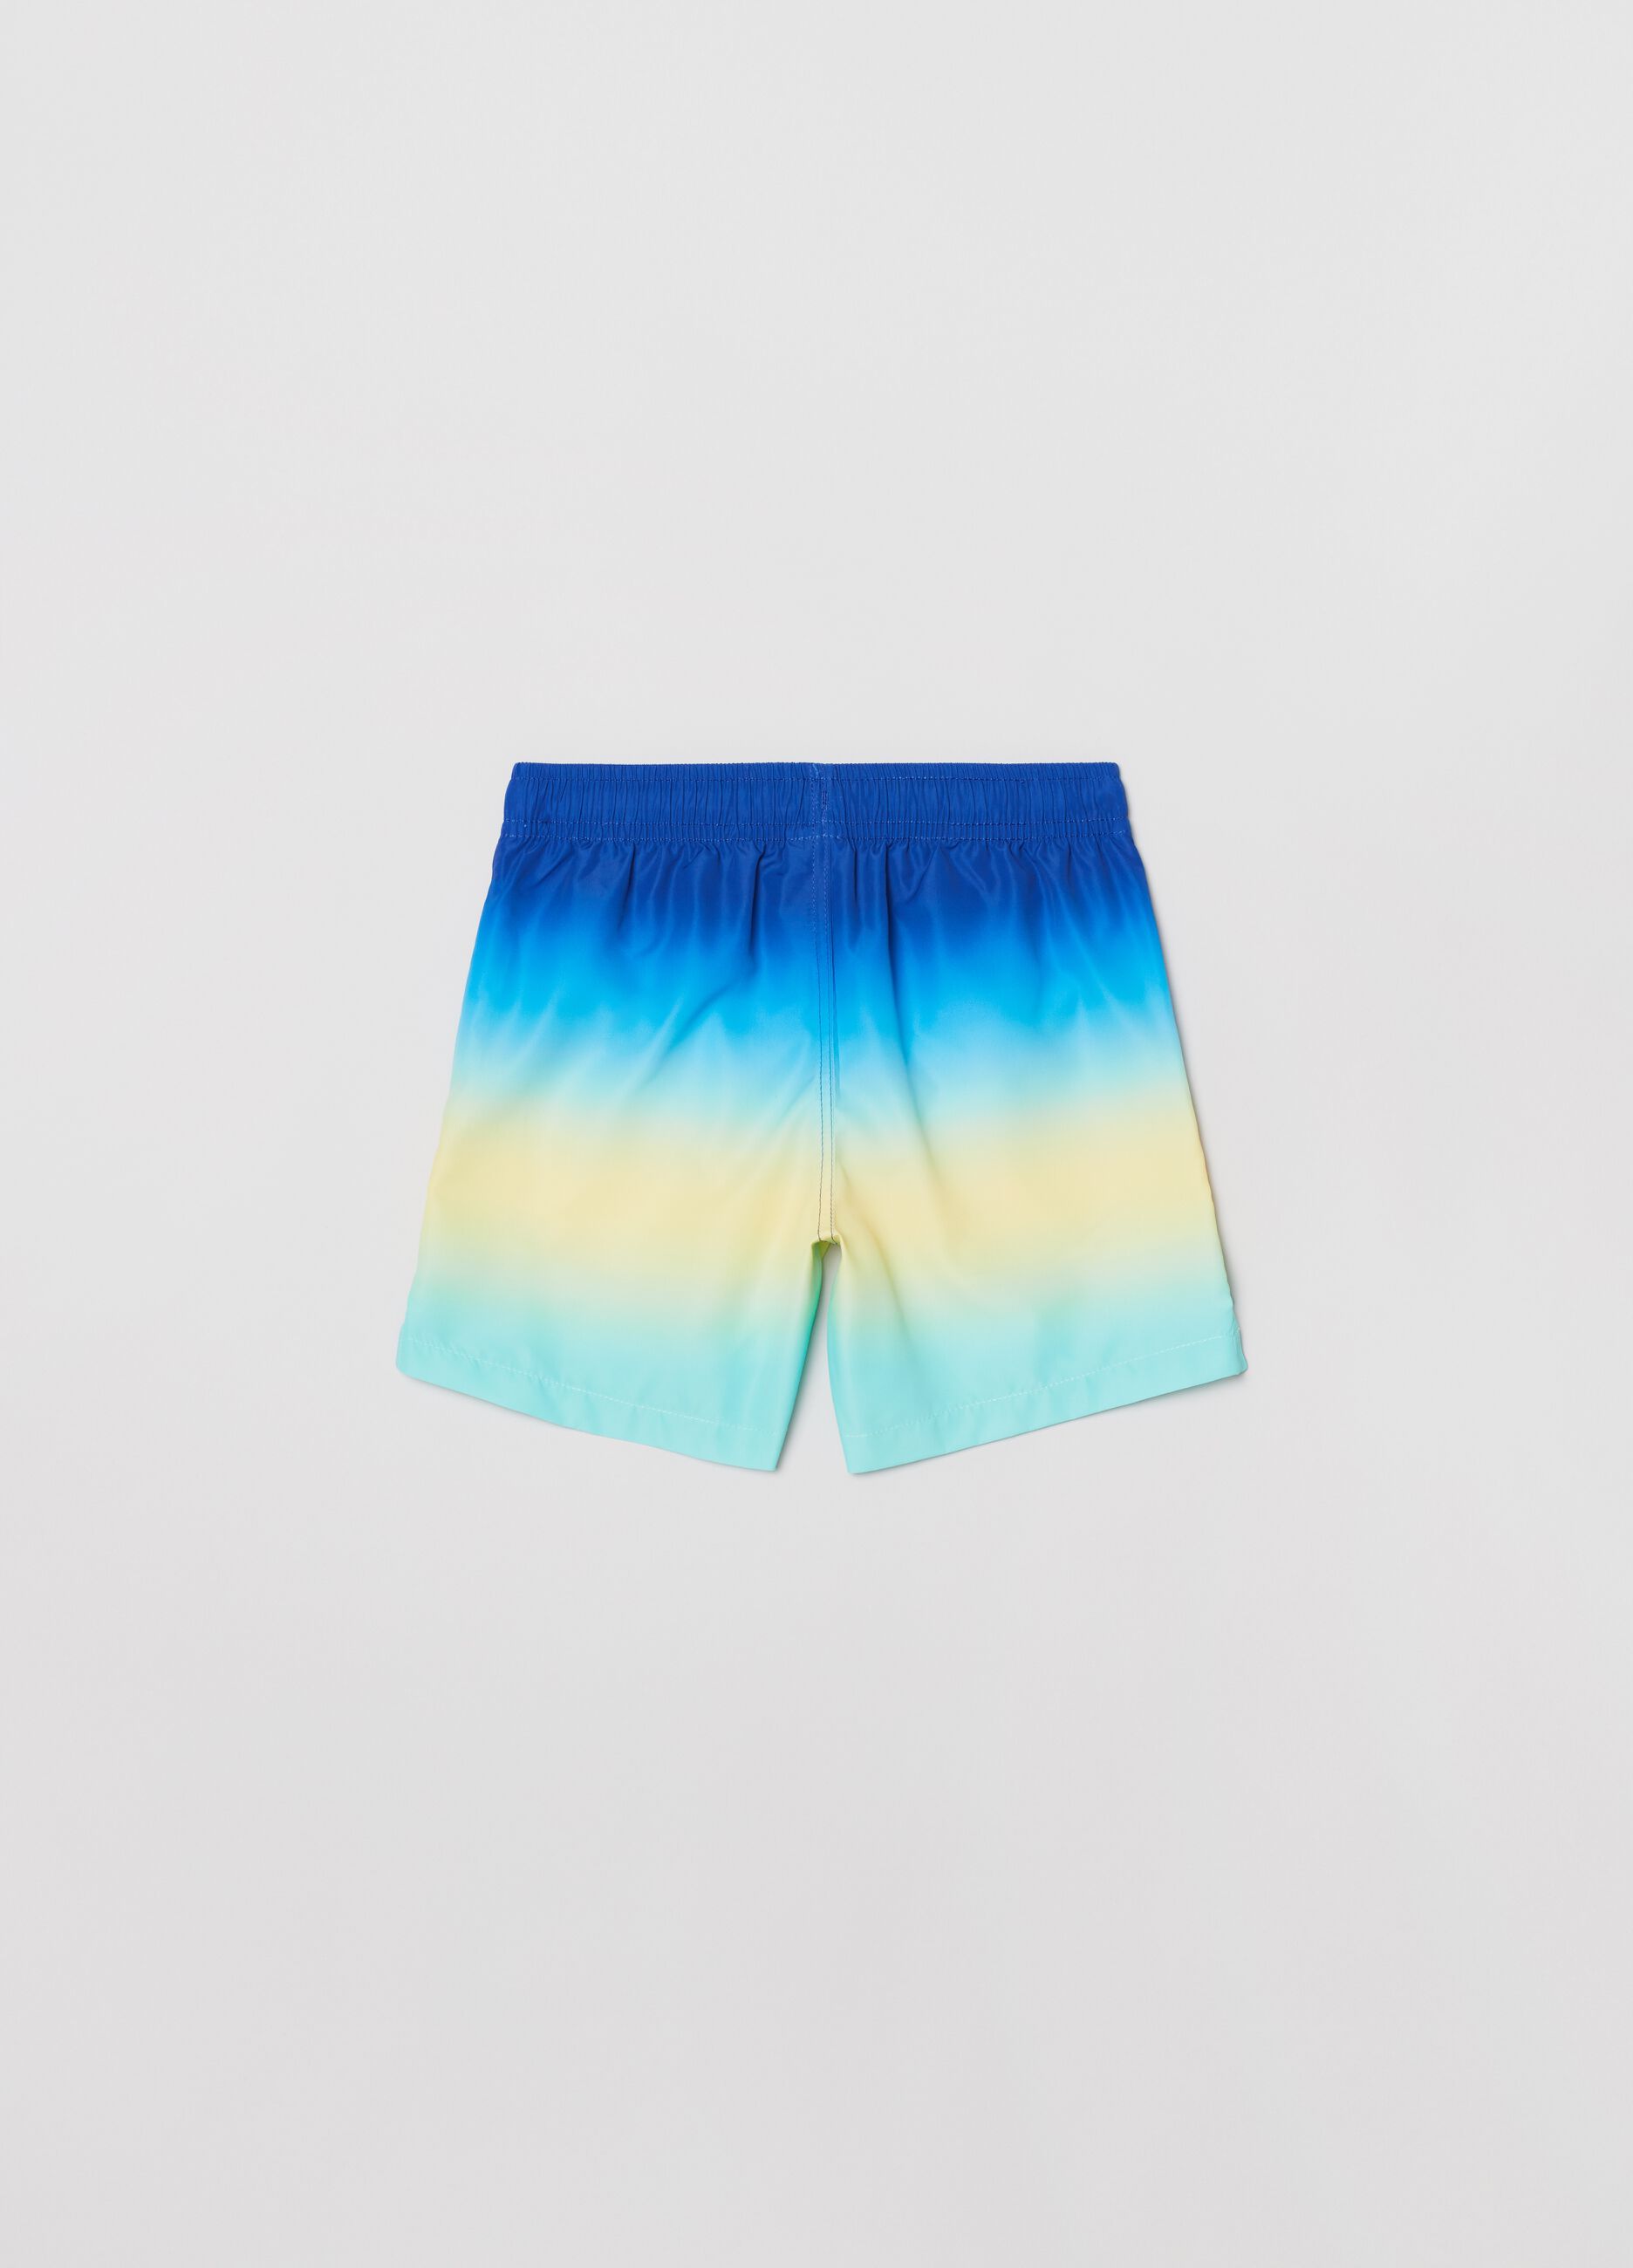 Maui and Sons degradé swimming trunks